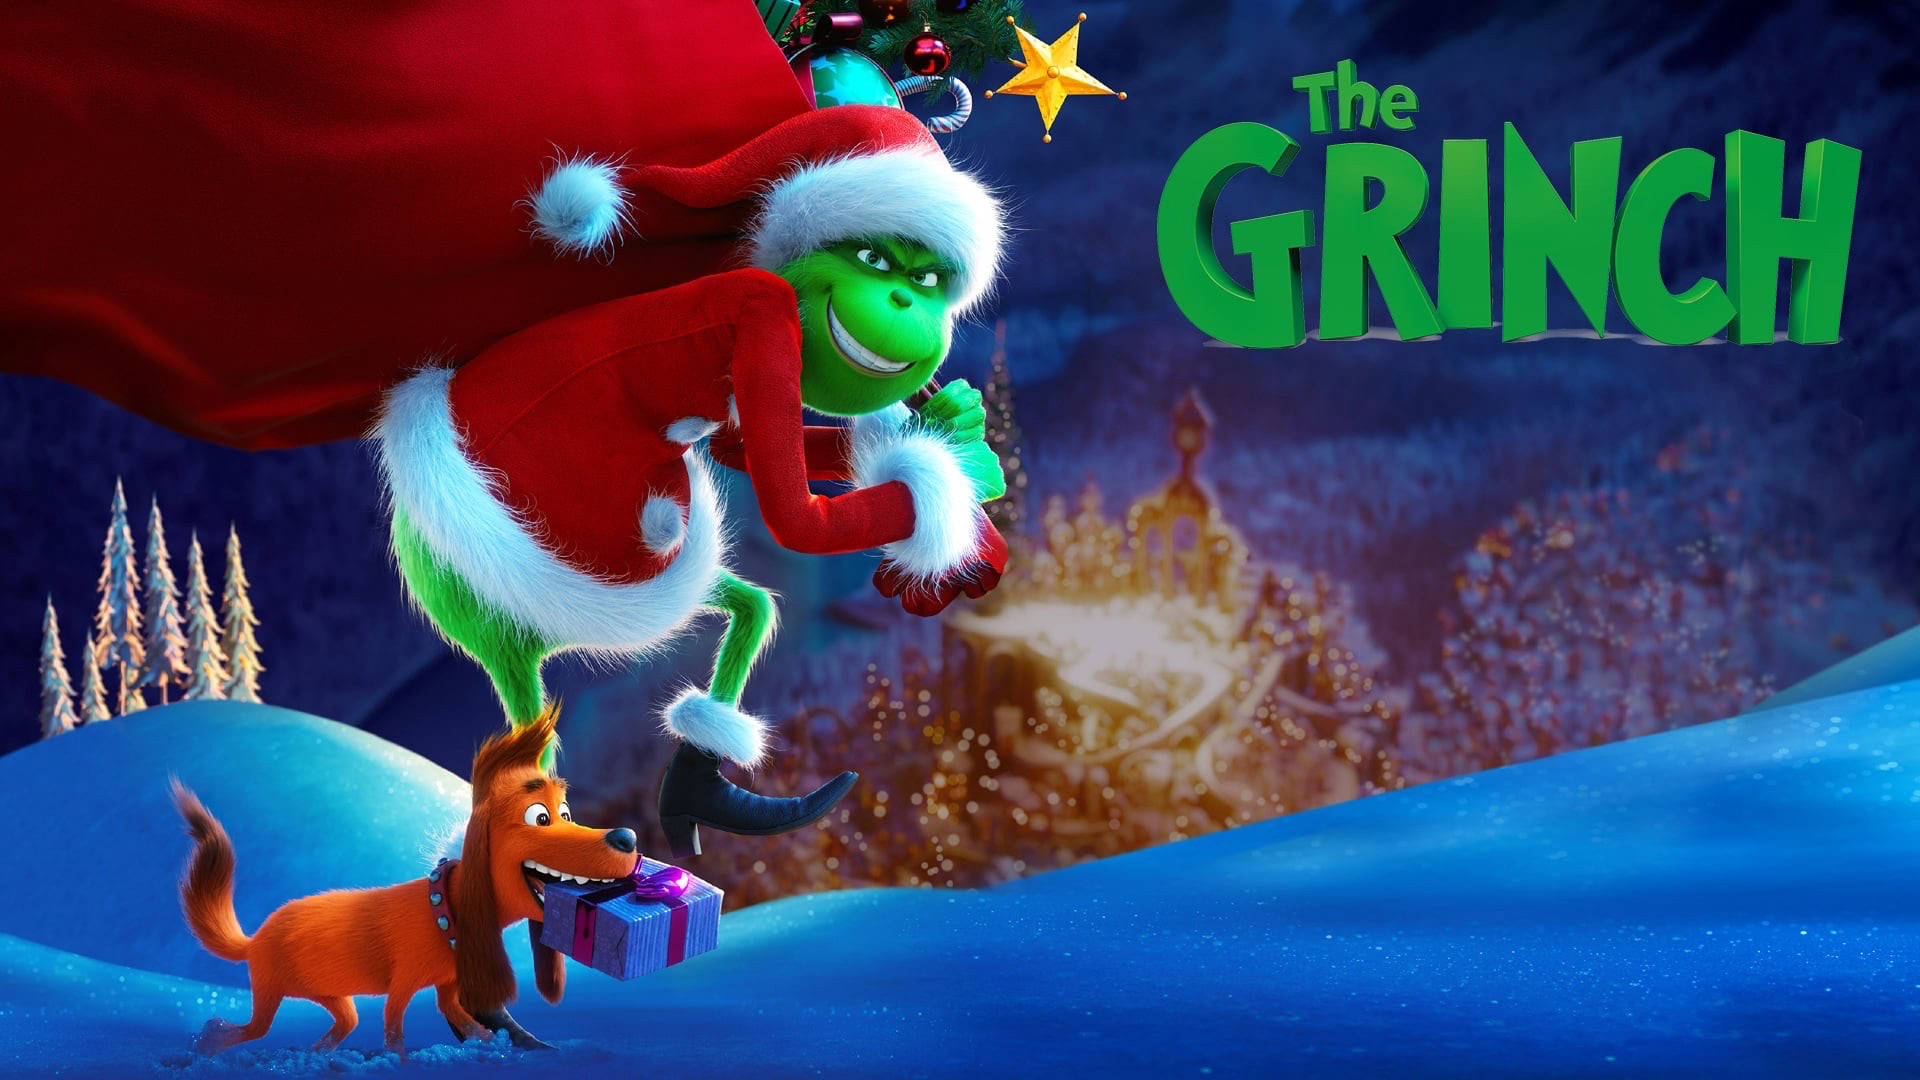 The Grinch Stealing Background